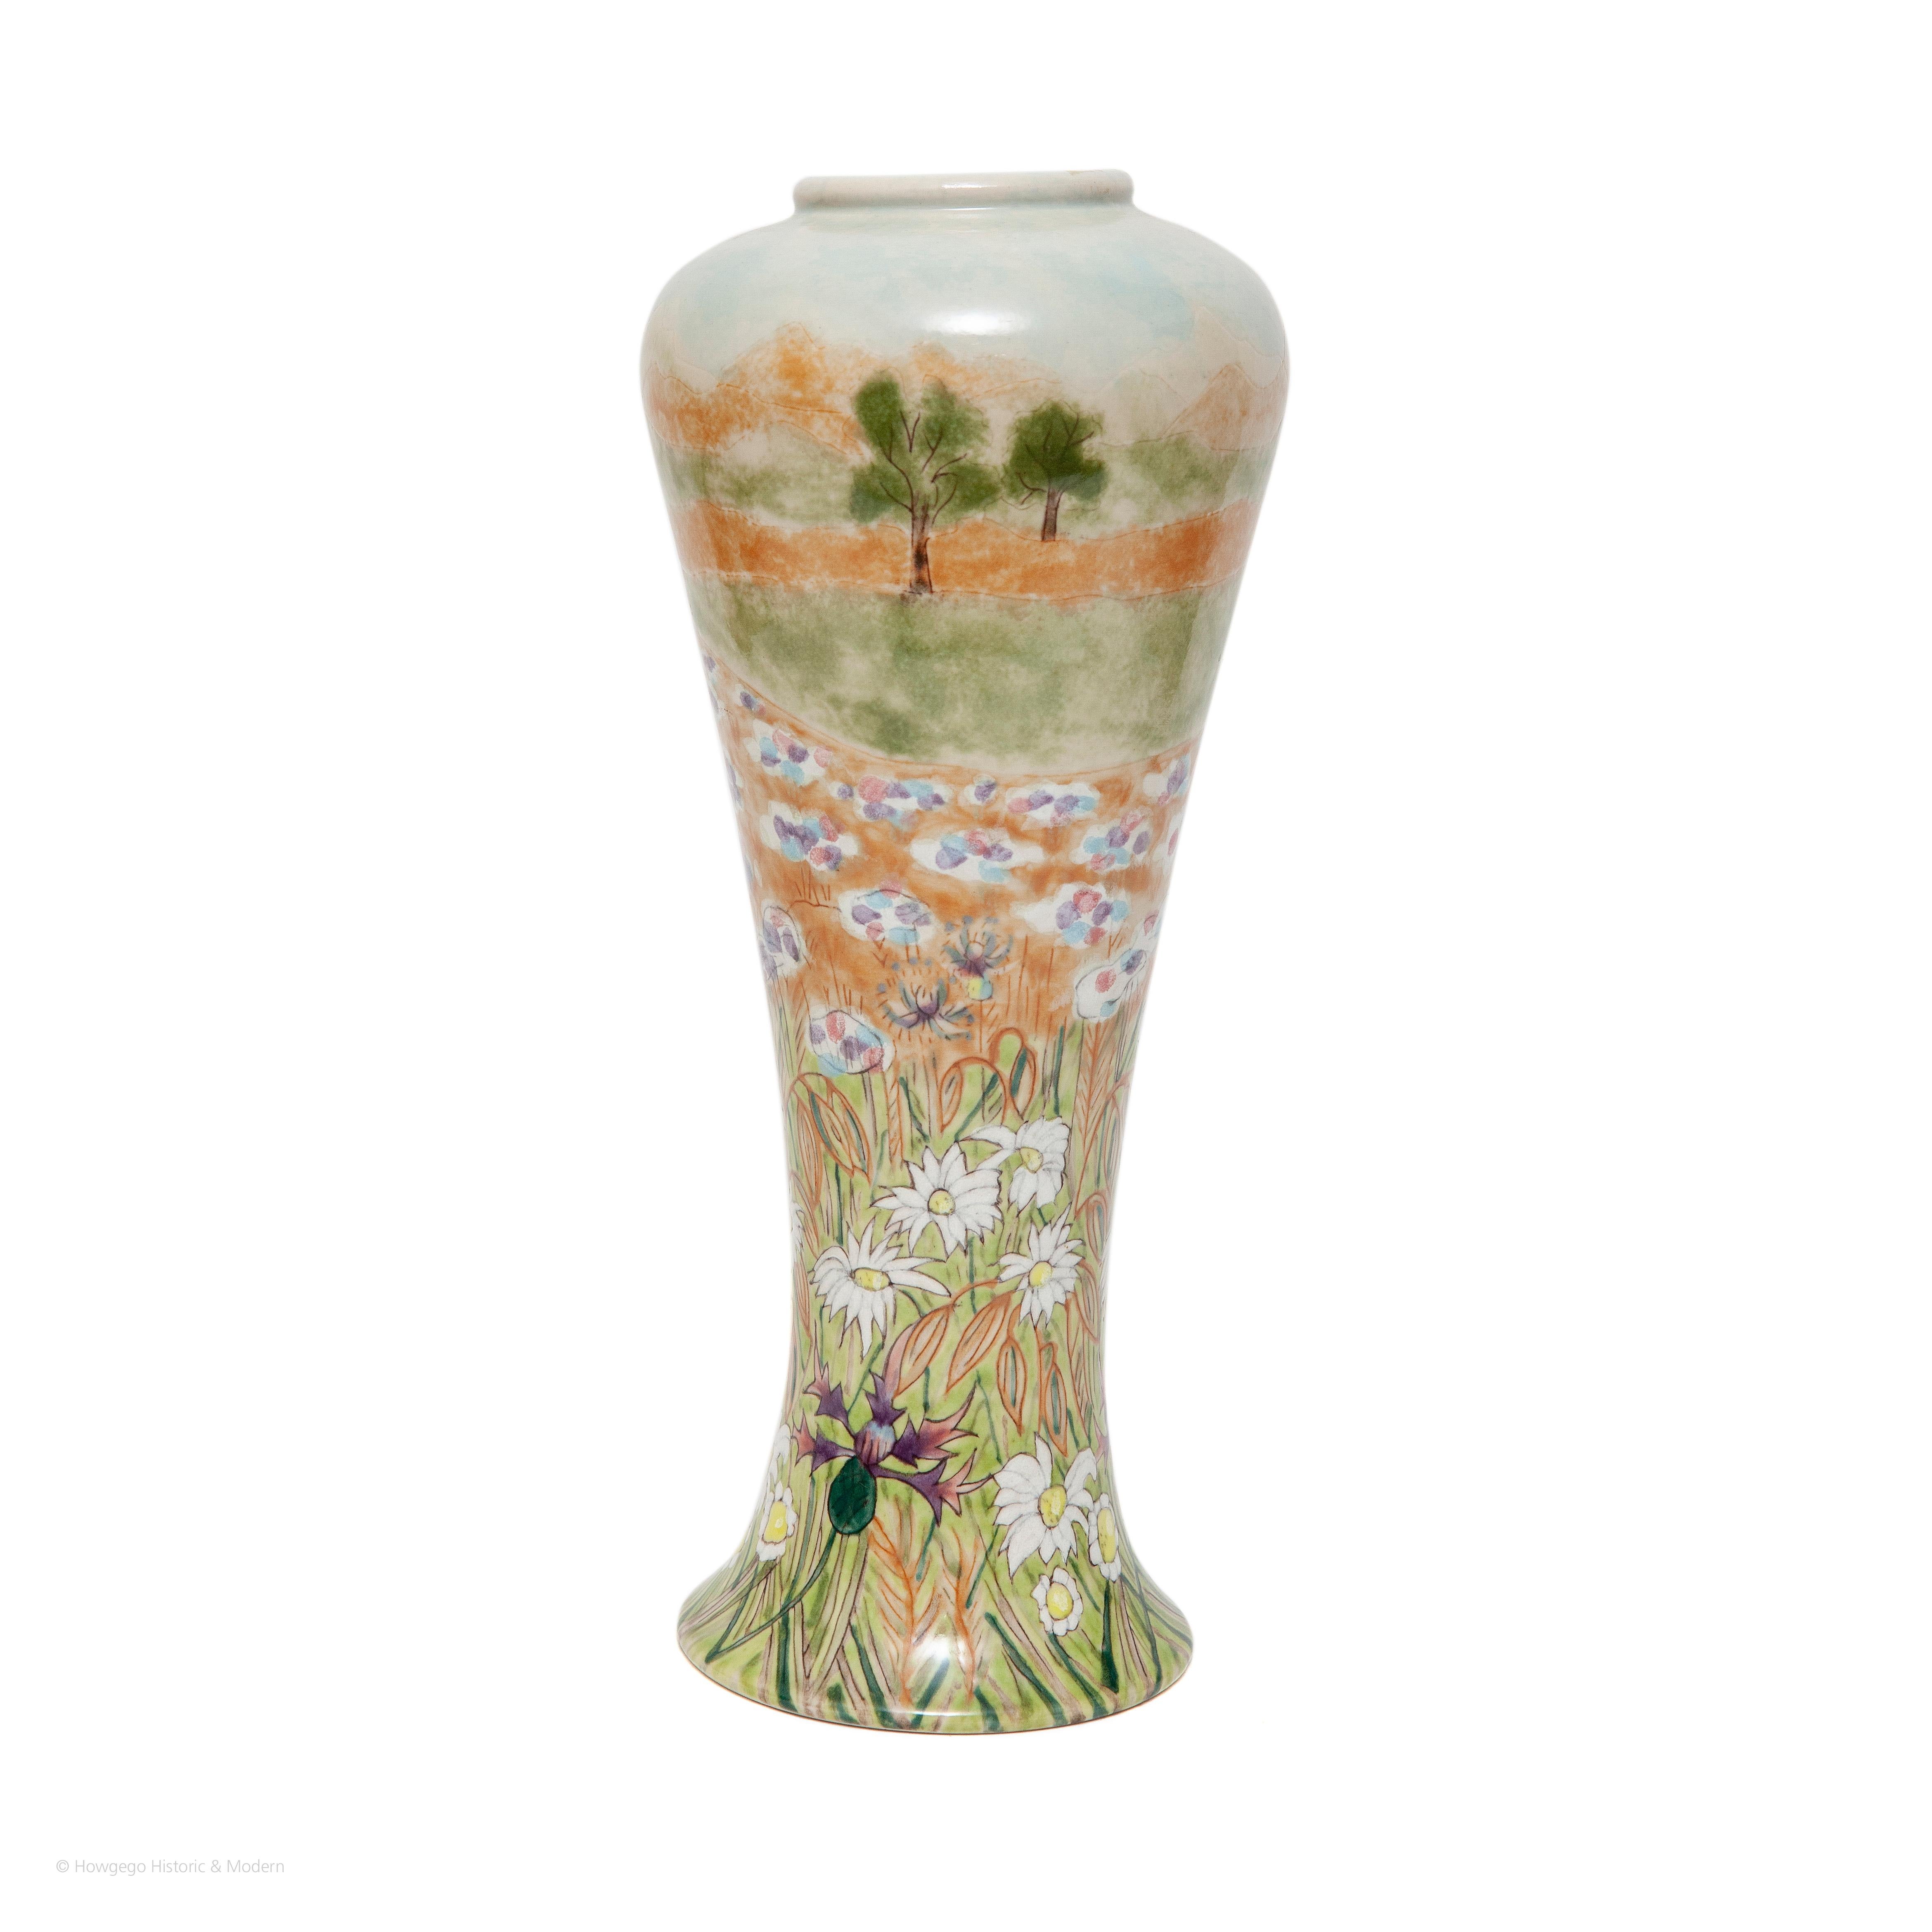 COBRIDGE SUMMER MEADOW, LIMITED EDITION VASE, MARKED 28/250 UNDERNEATH, 1999, 10” high
Delicate, injecting the beauty and lightness of summer meadows into the interior
Great perspective with the detailing of the flowerheads in the foreground of the